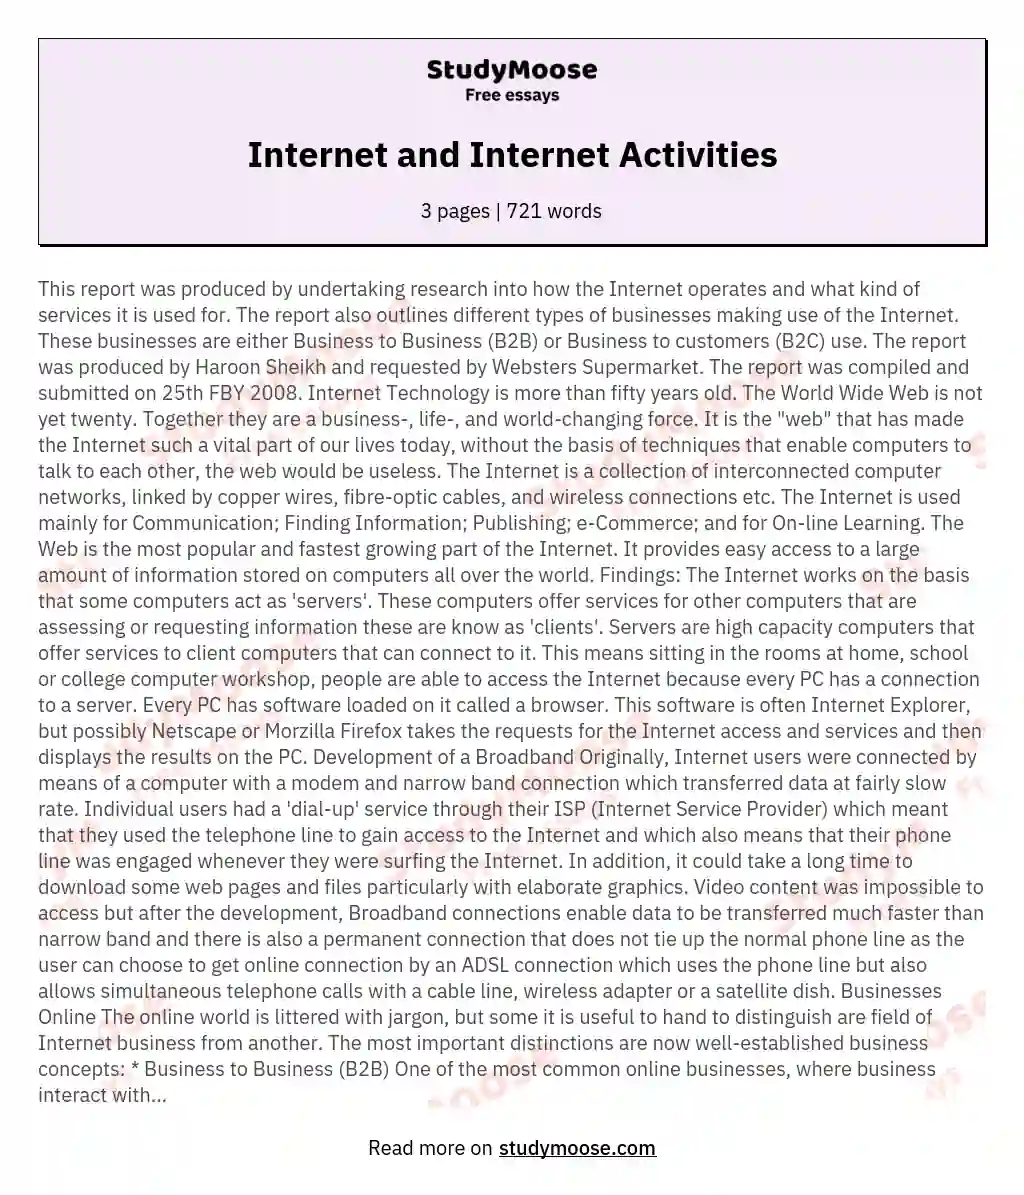 Internet and Internet Activities